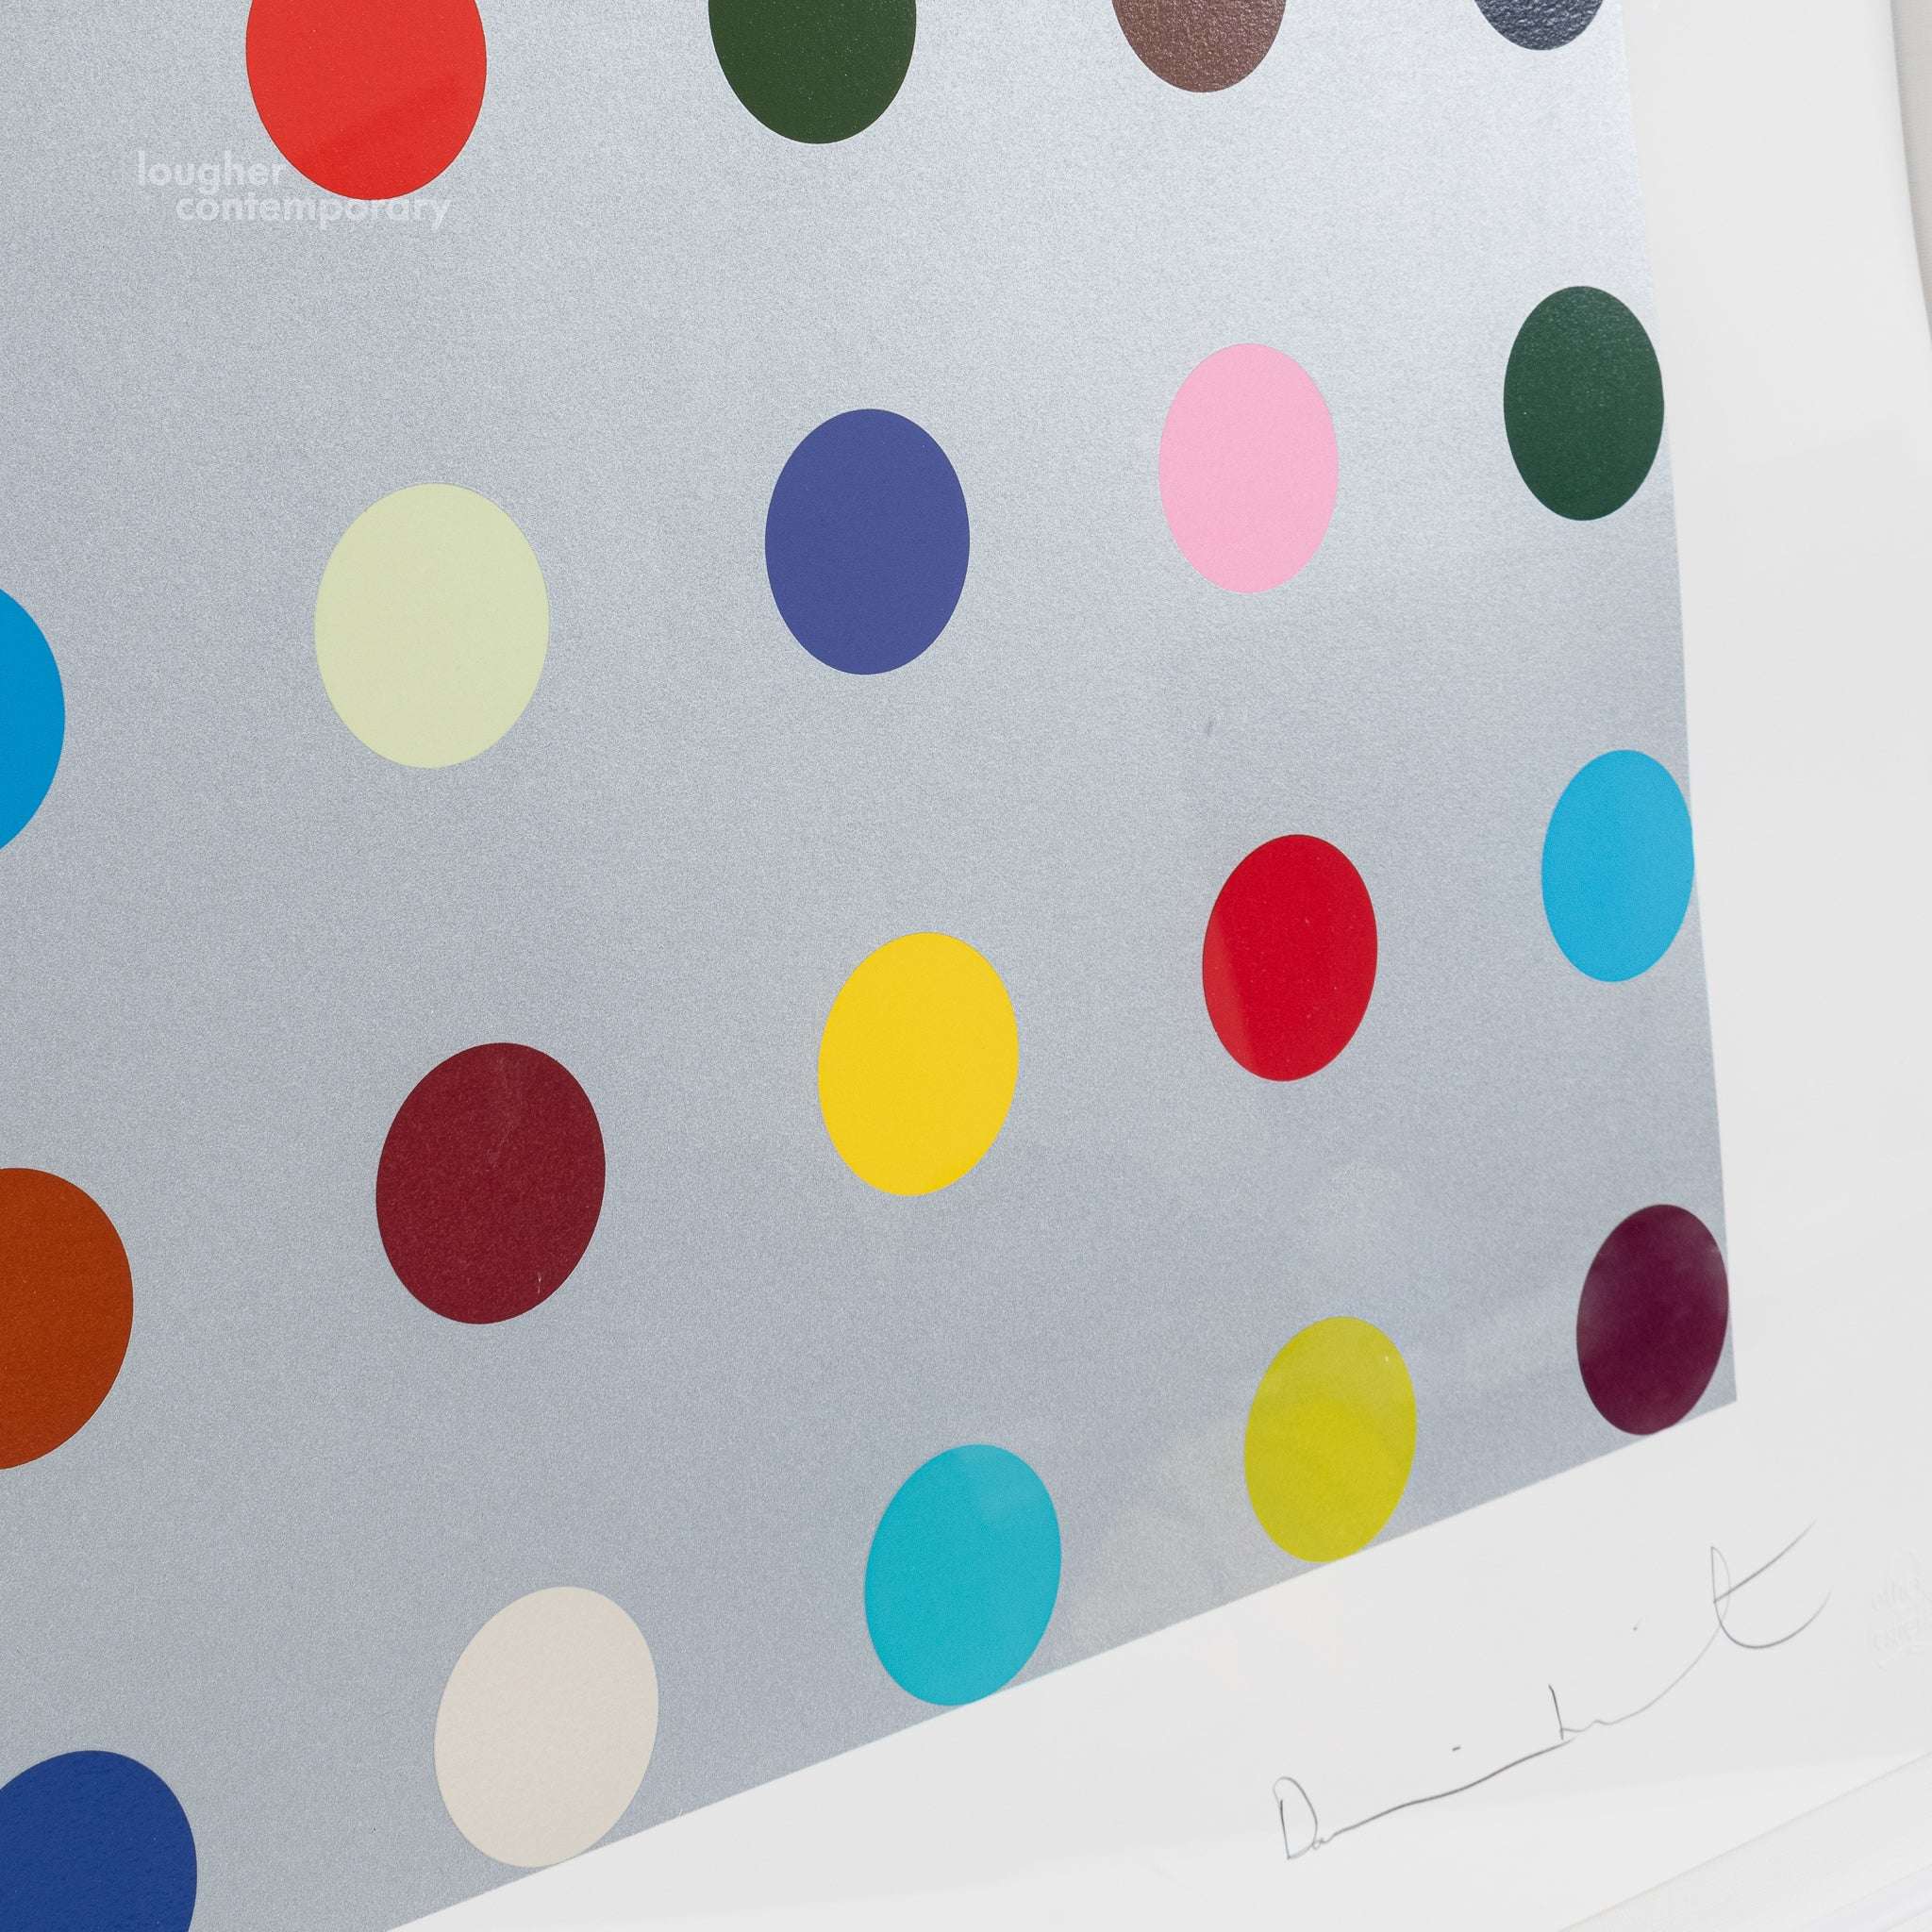 Damien Hirst, Histidyl, 2008 For Sale - Lougher Contemporary